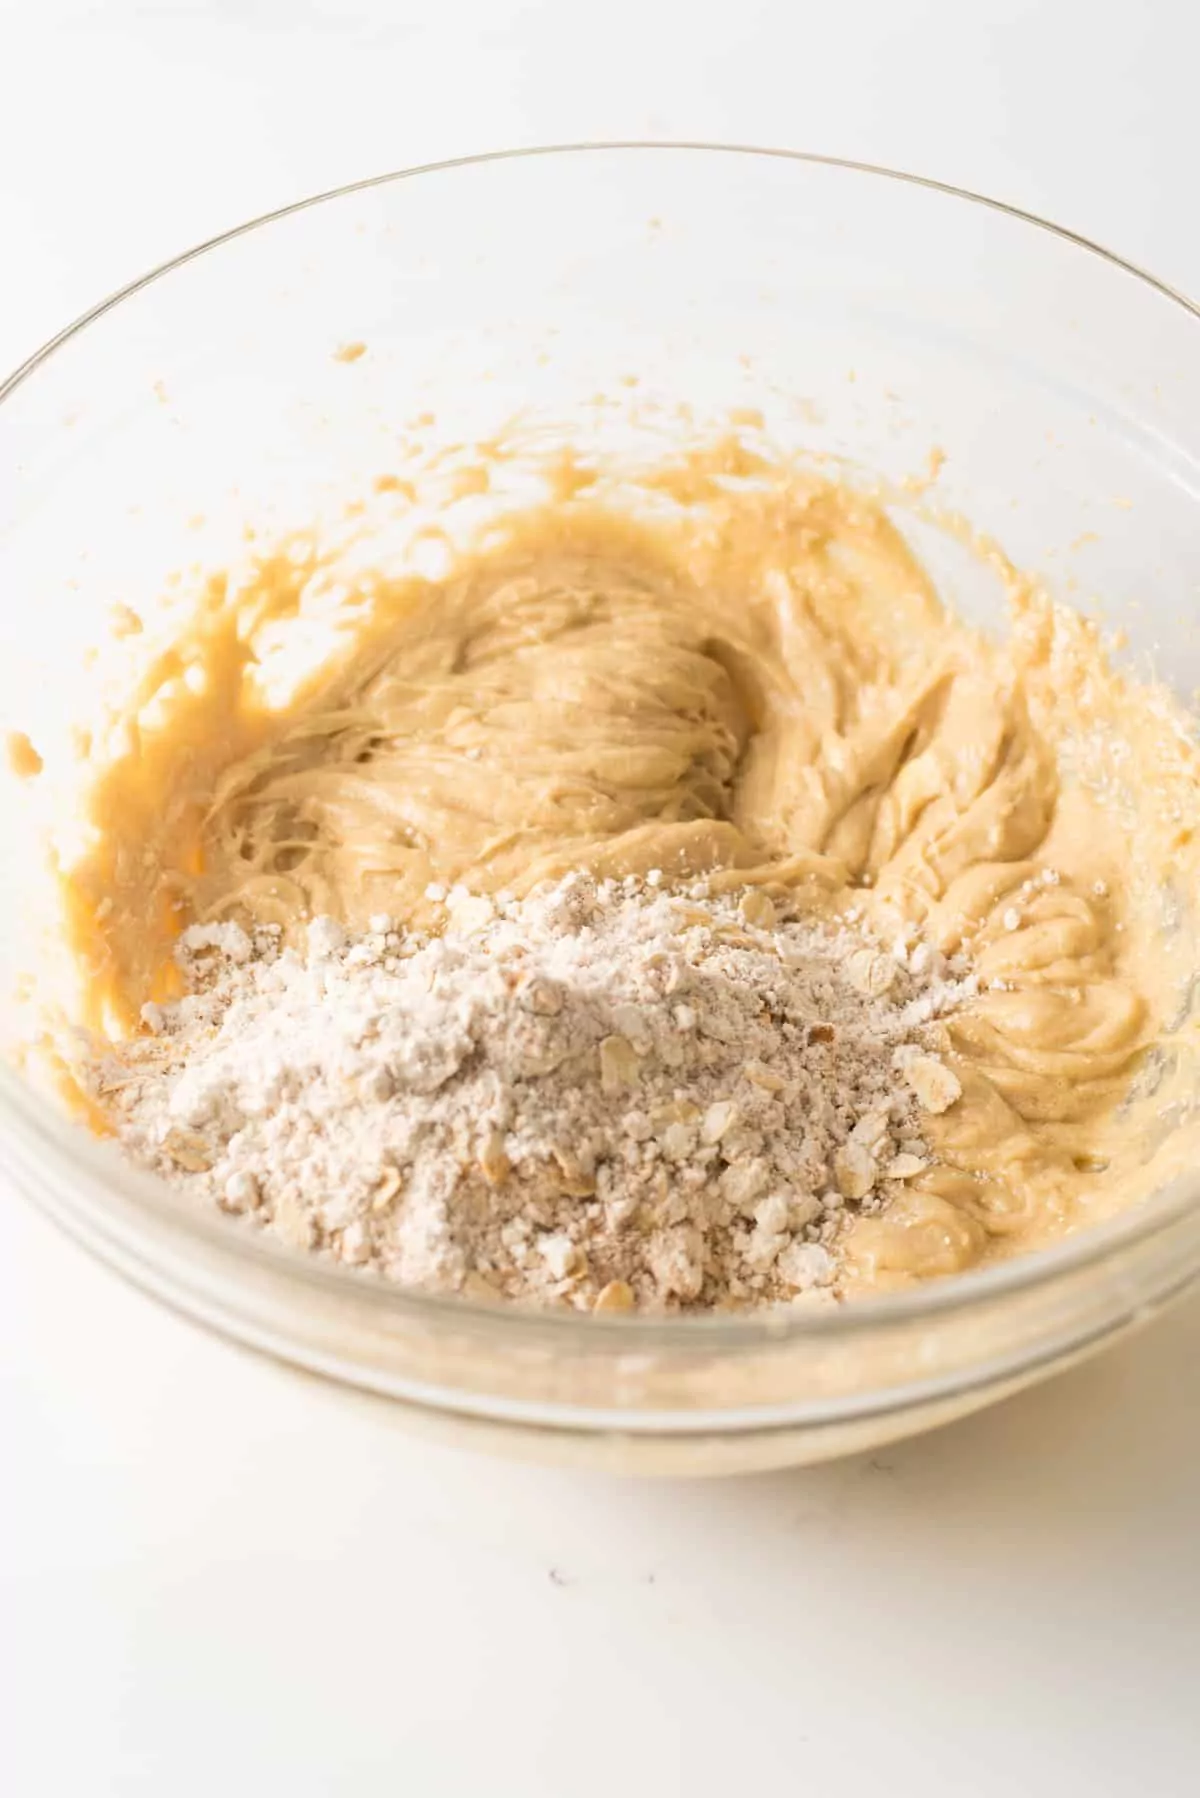 Add Bisquick baking mix to butter and brown sugar mixture.